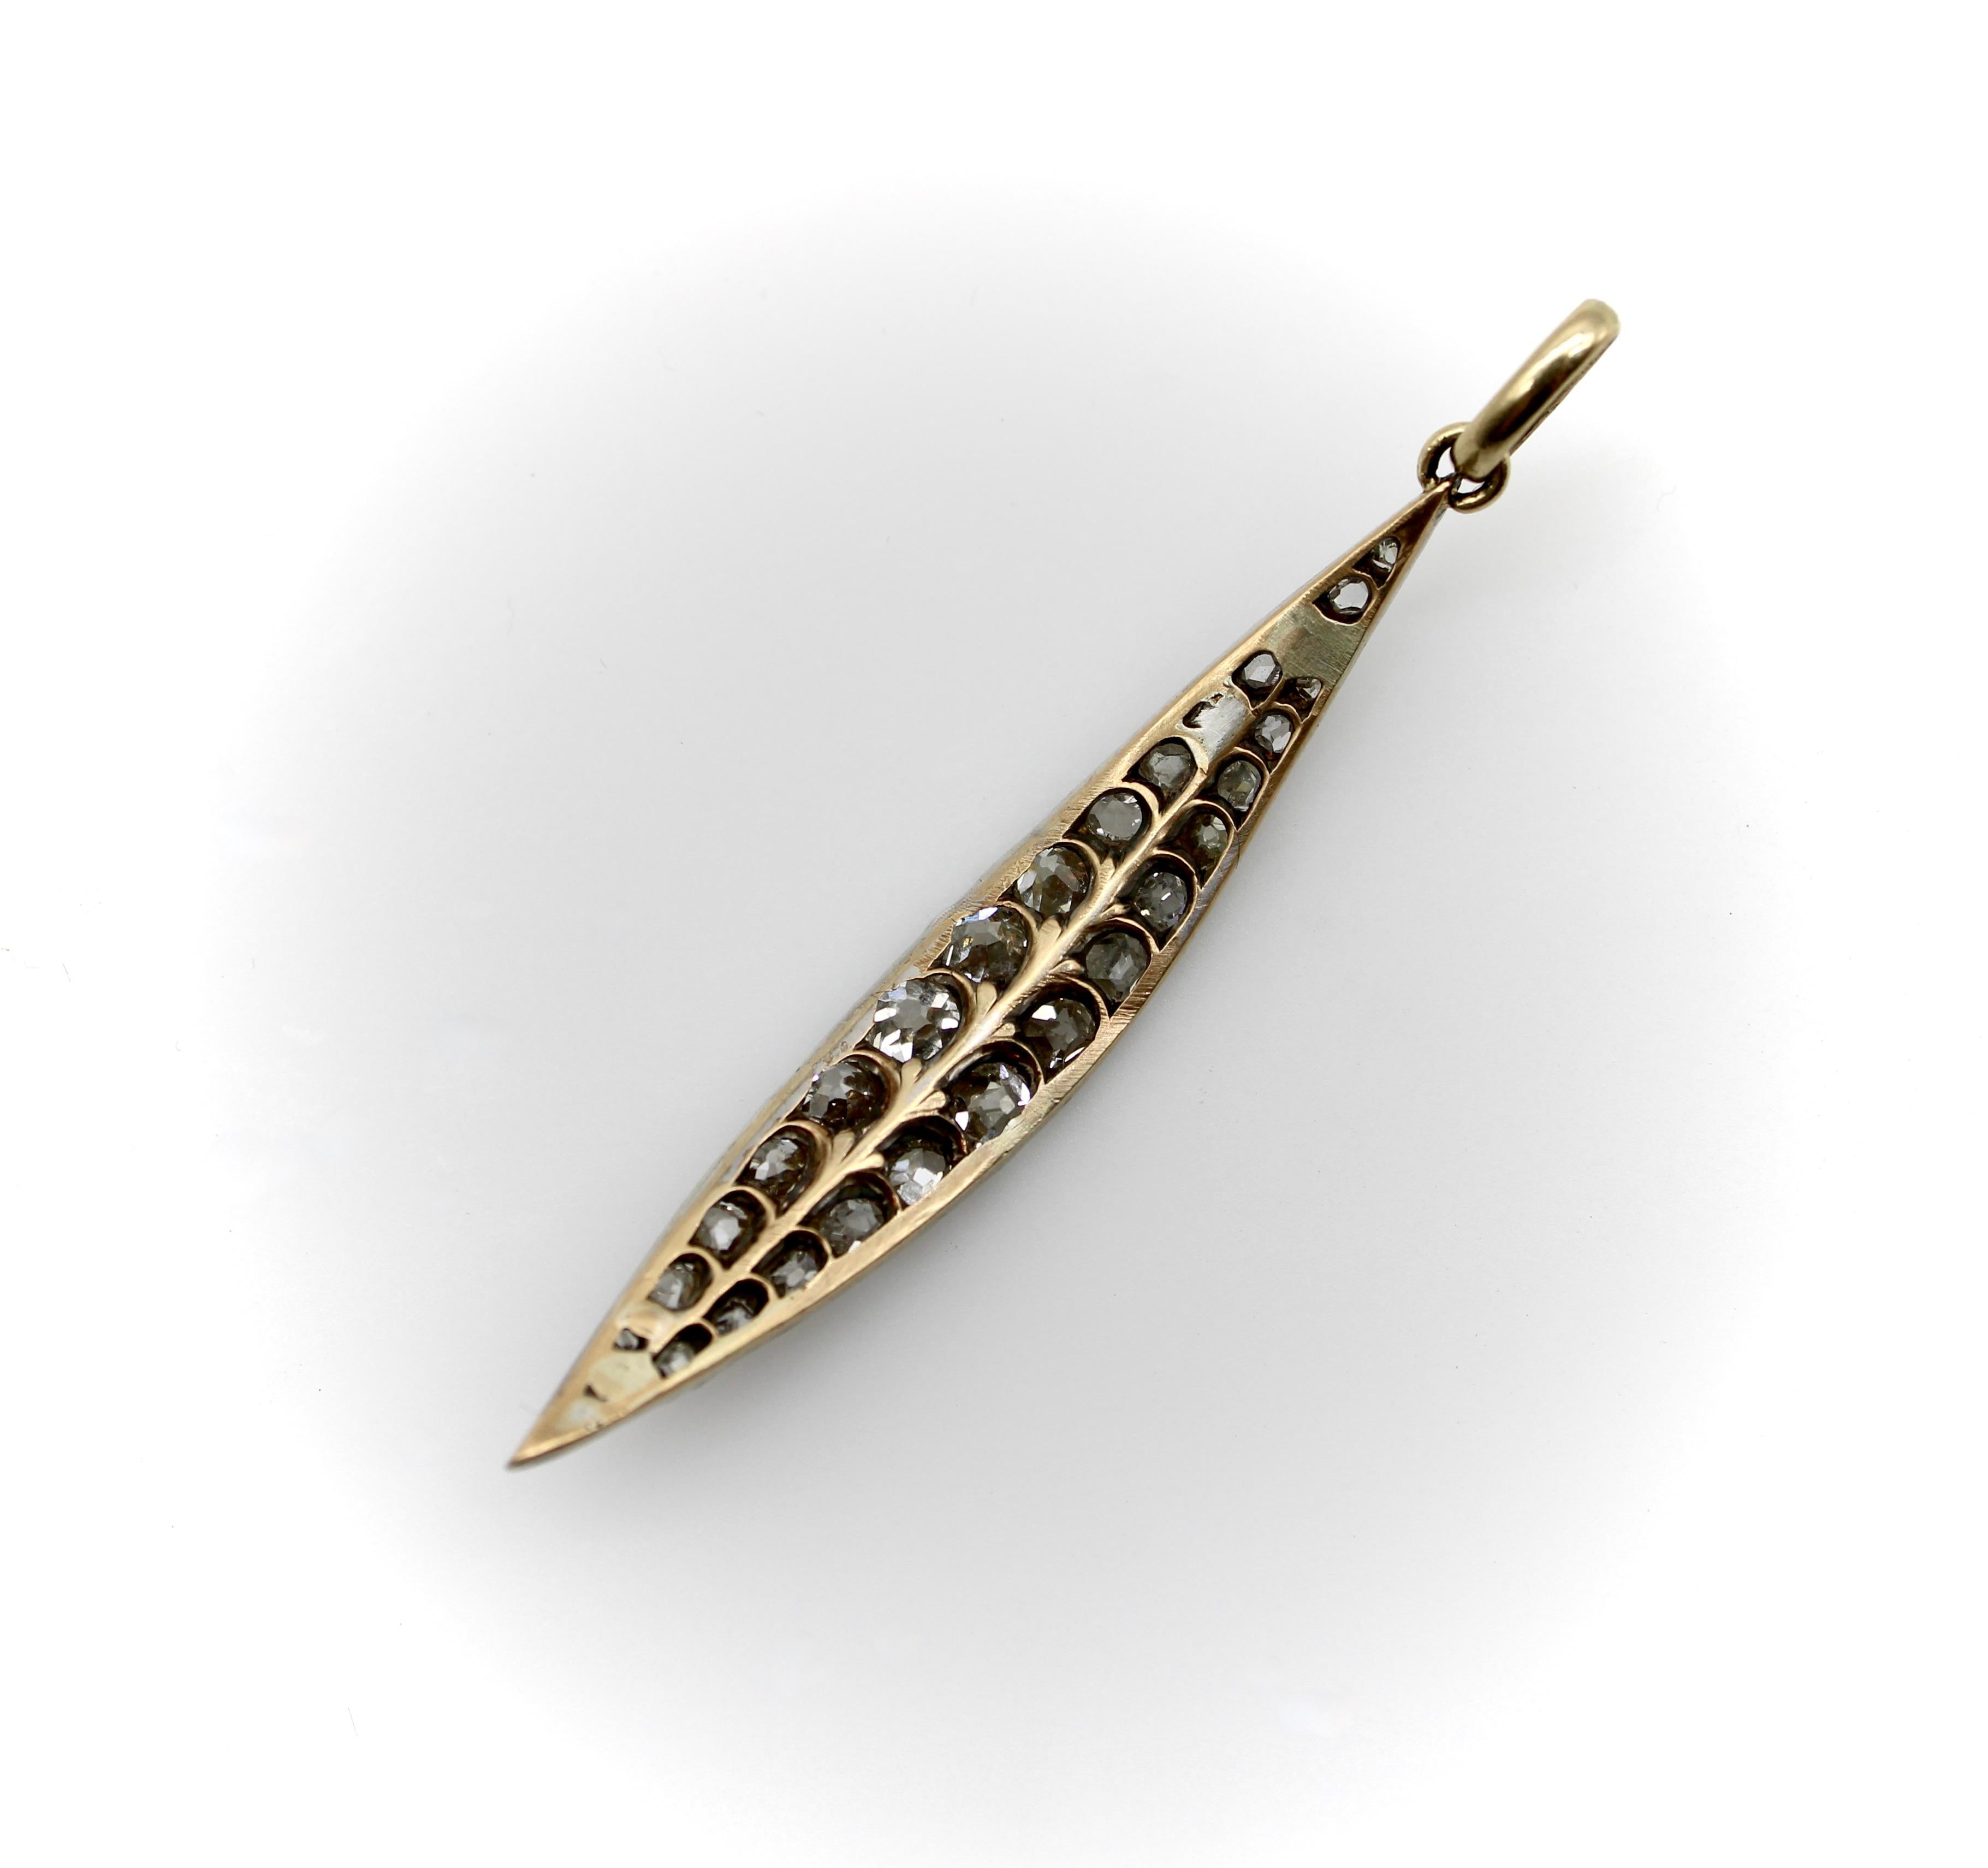 This extraordinary leaf-shaped pendant is studded with gorgeous chunky Old Mine Cut diamonds. We believe this was once part of a tiara and was most likely the shape that adorned the headless. We added an ample size 14k gold bail so that it could be